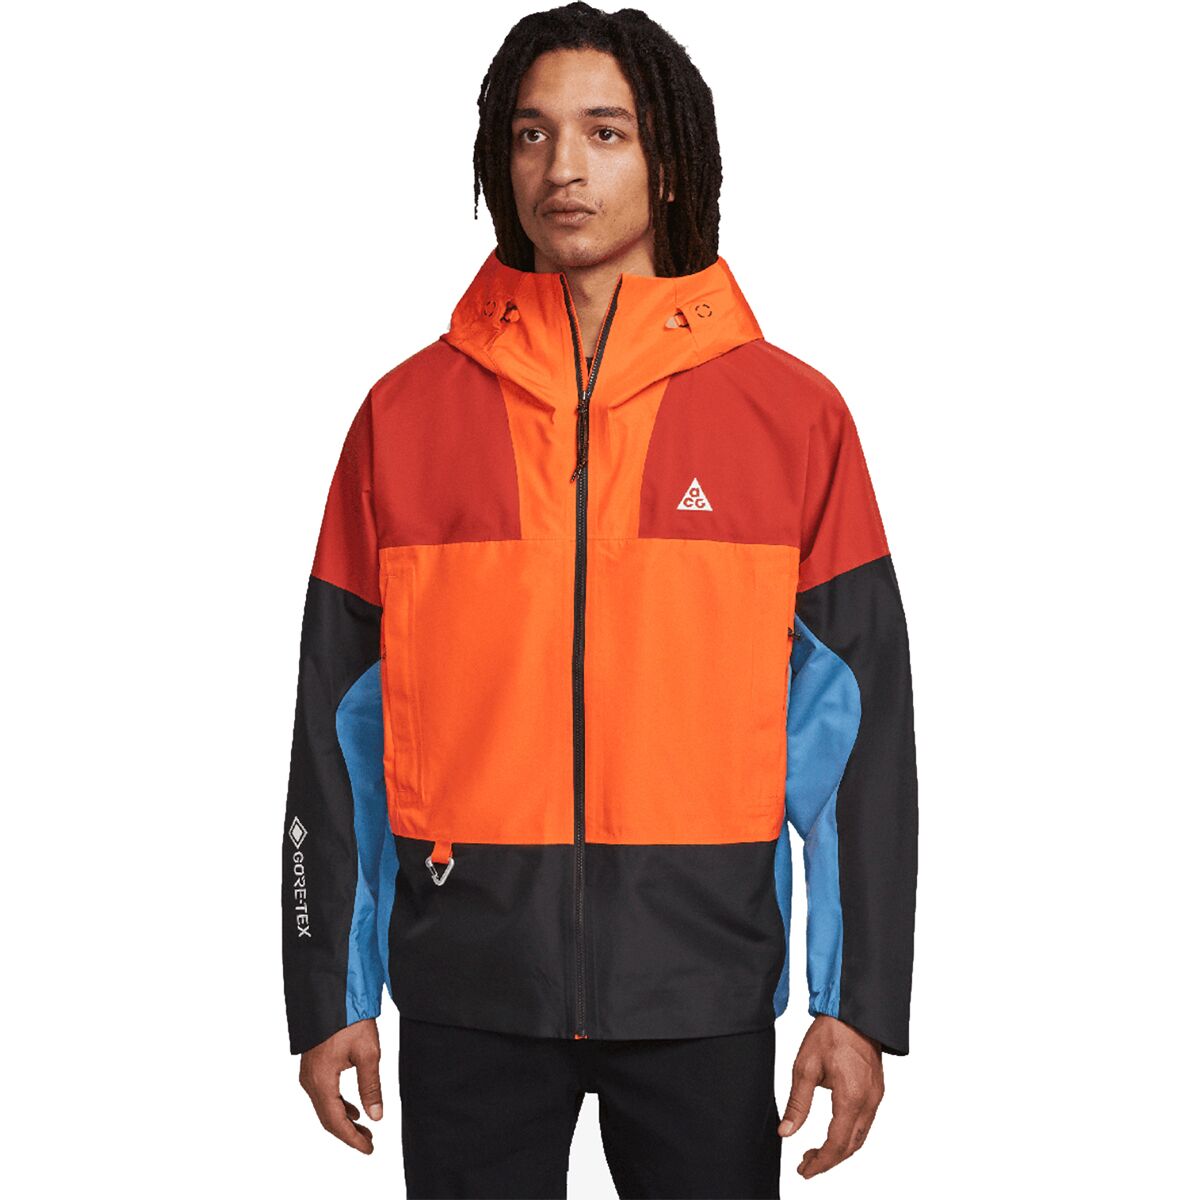 Nike Storm-FIT ADV ACG Chain Of Craters Jacket - Men's